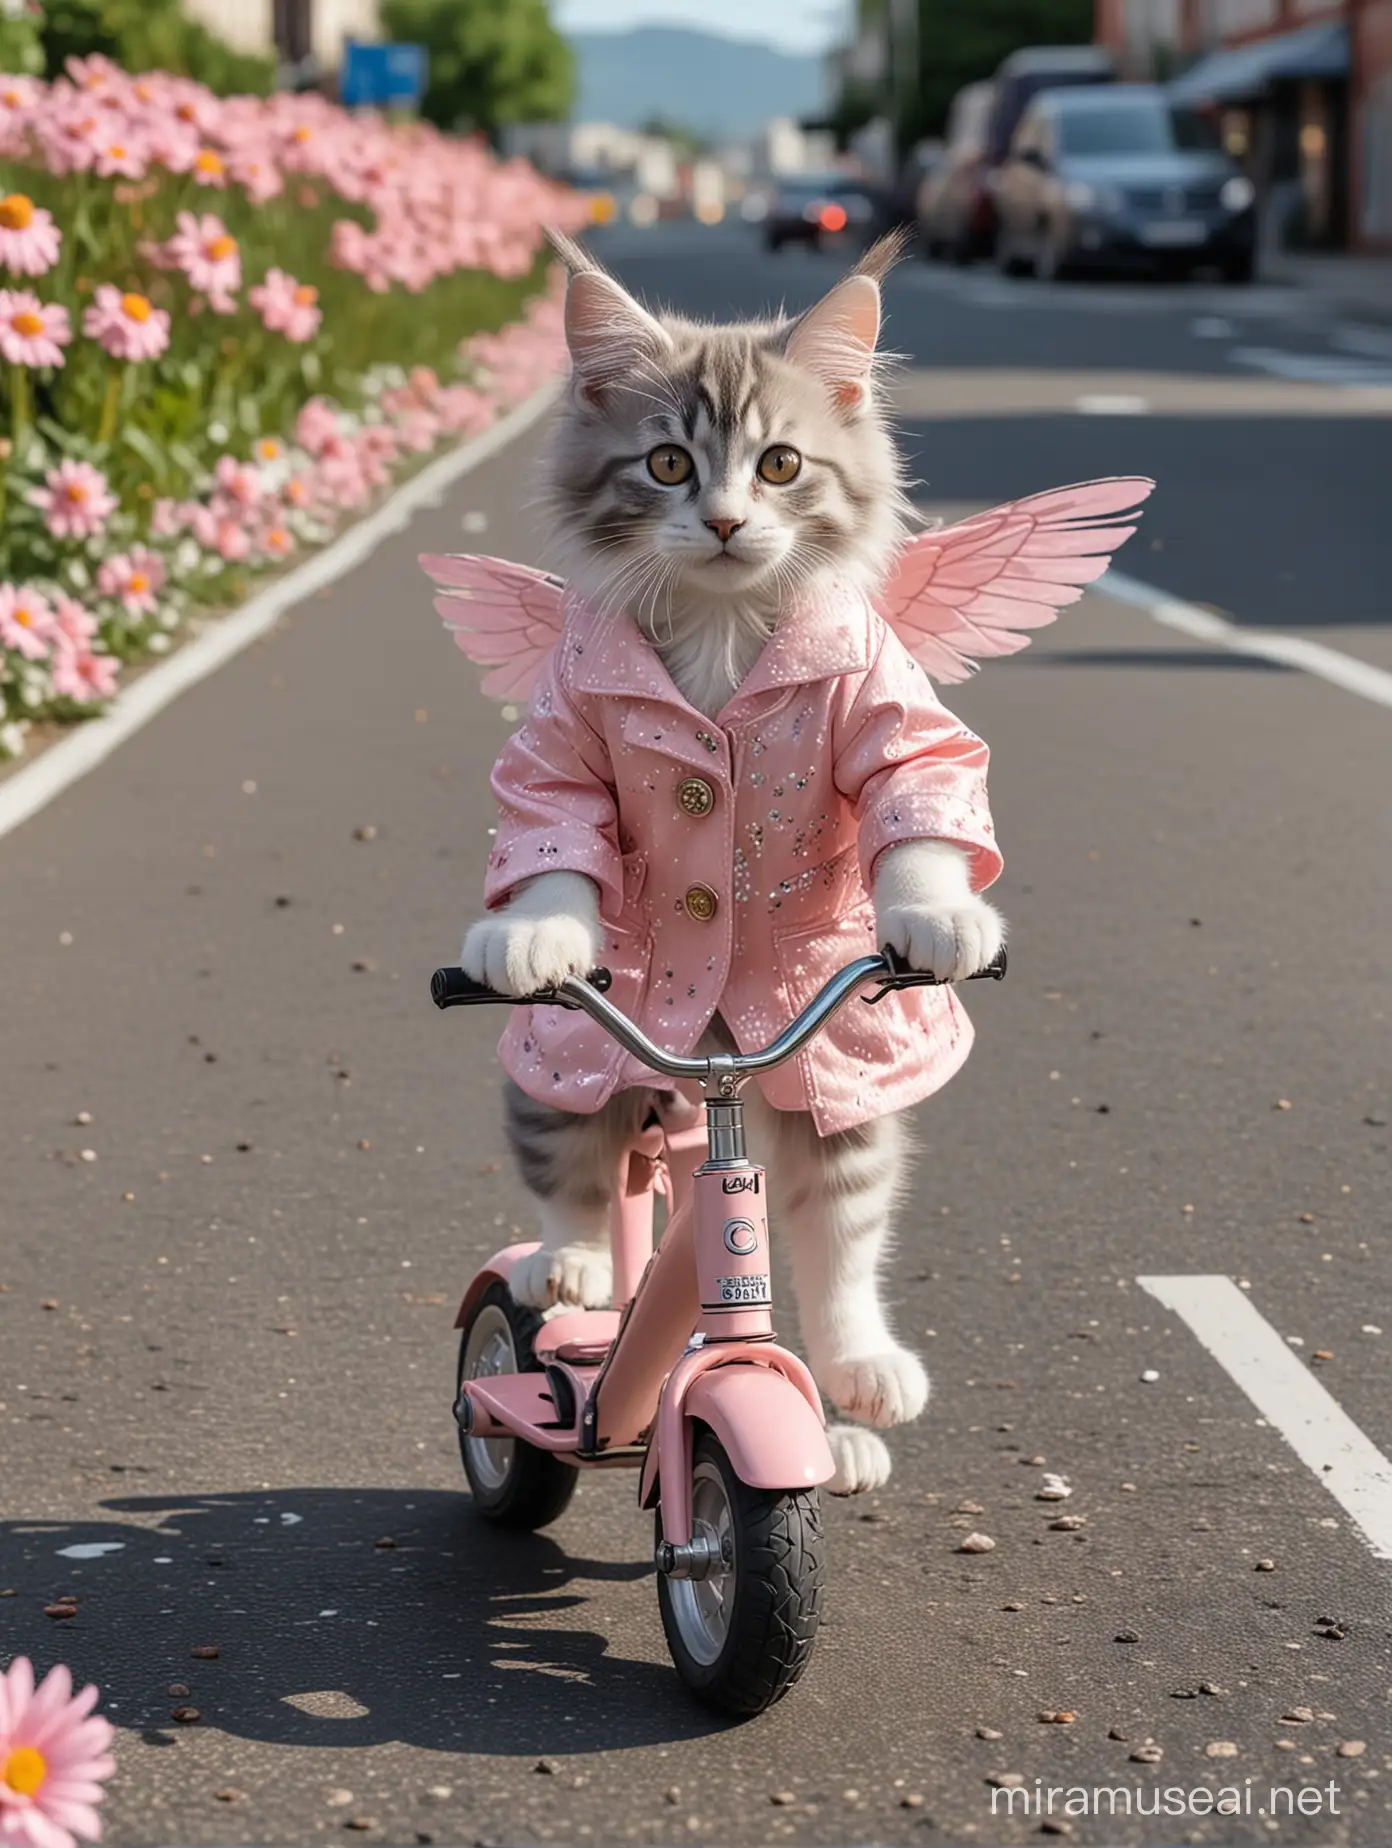 Adorable Maine Coon Kitten with Elf Wings Crosses Urban Street in Chanel Attire